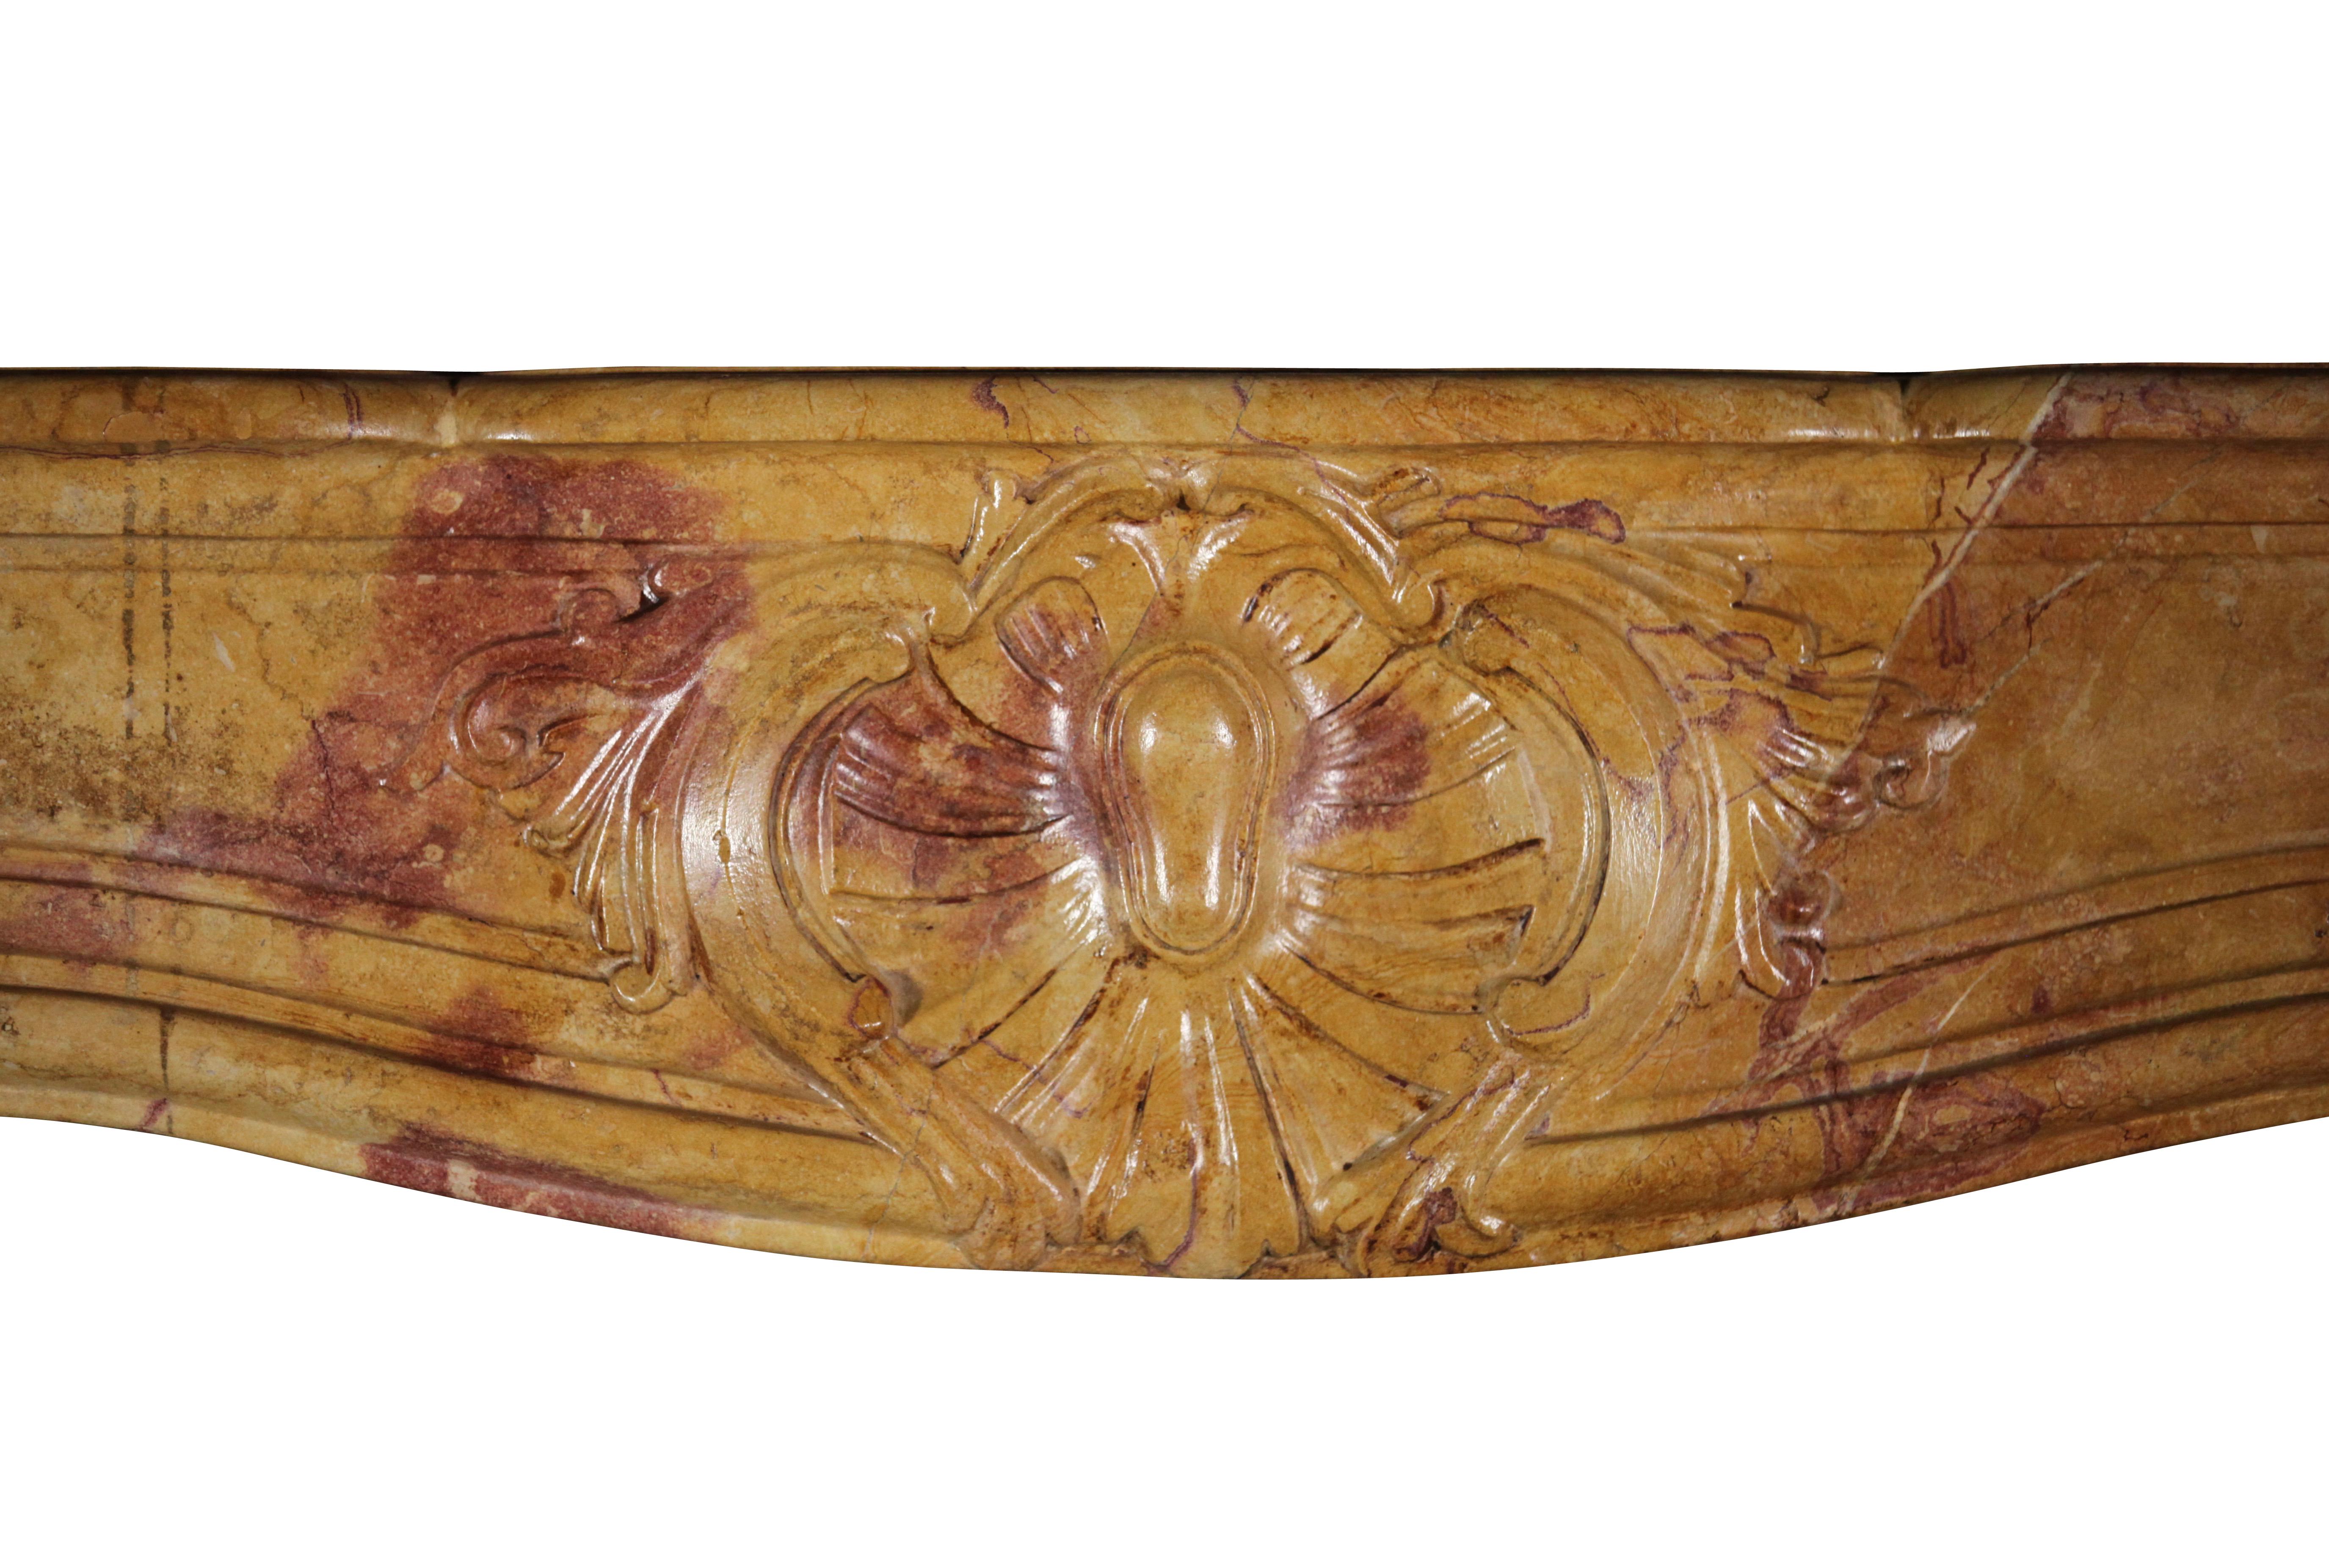 This is a very unique, once in a lifetime, original antique fireplace surround in deep color hardstone out of the Corton vinyard area in France. Early French Régency period. This mantle works in grand interiors with grand art; from Classic to most